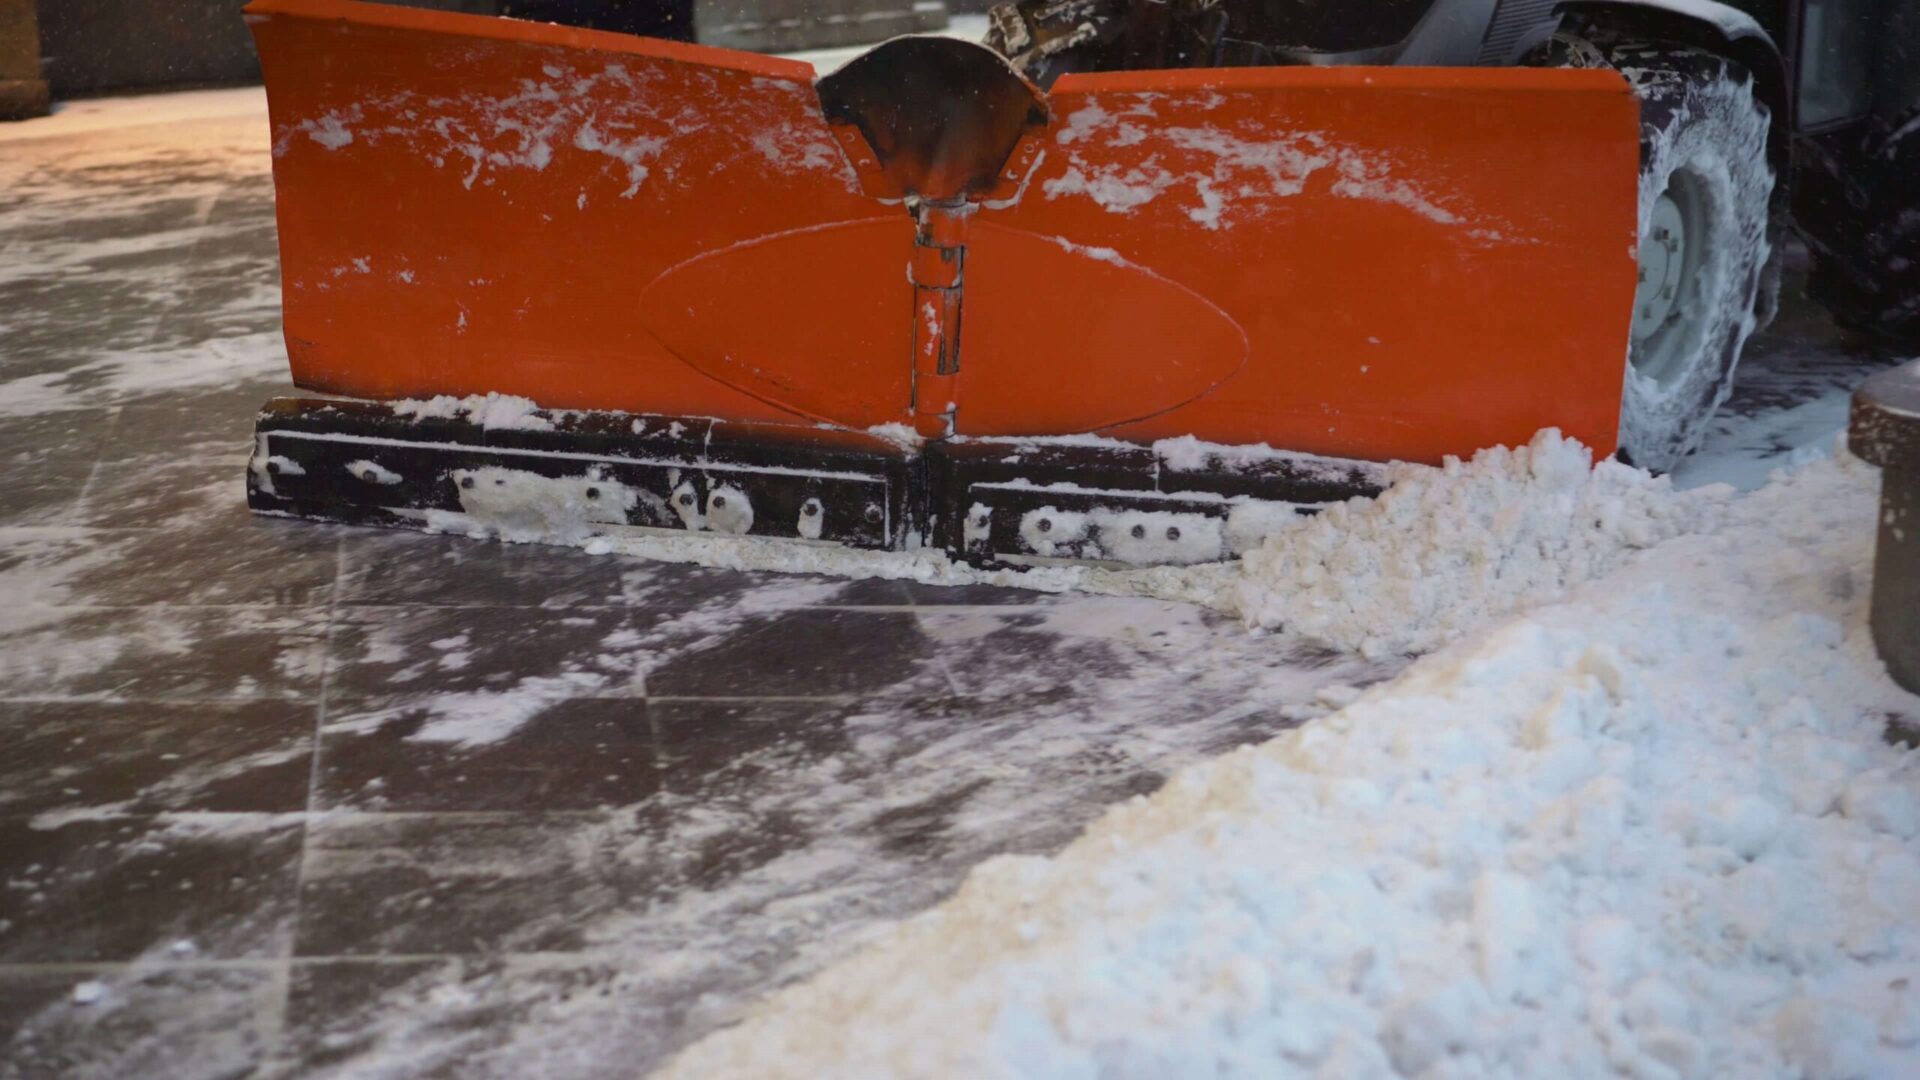 An orange snow plow attachment is clearing a snowy surface, pushing white snow to the side, with a vehicle partially visible behind it.